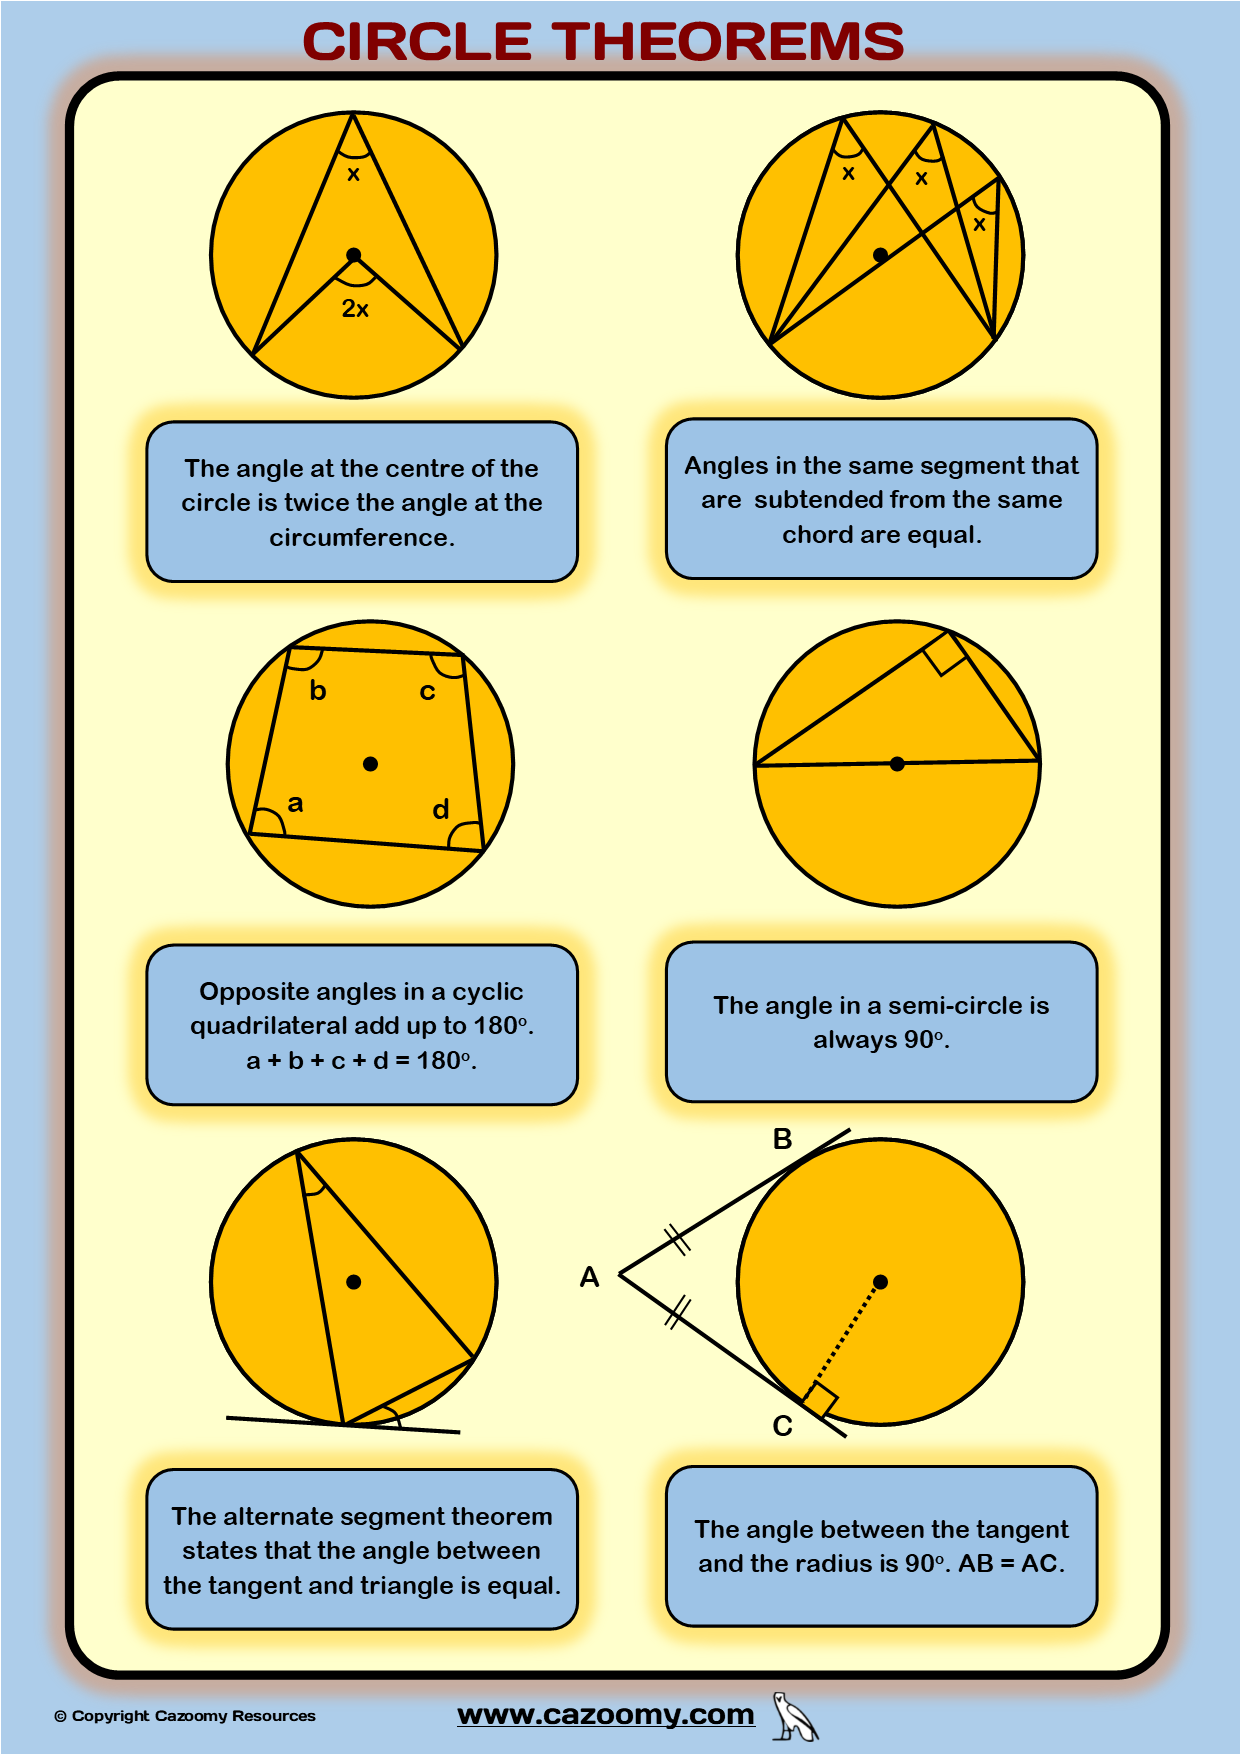 Circle Theorems Worksheets - New & Engaging  Cazoomy Inside Angles In A Circle Worksheet